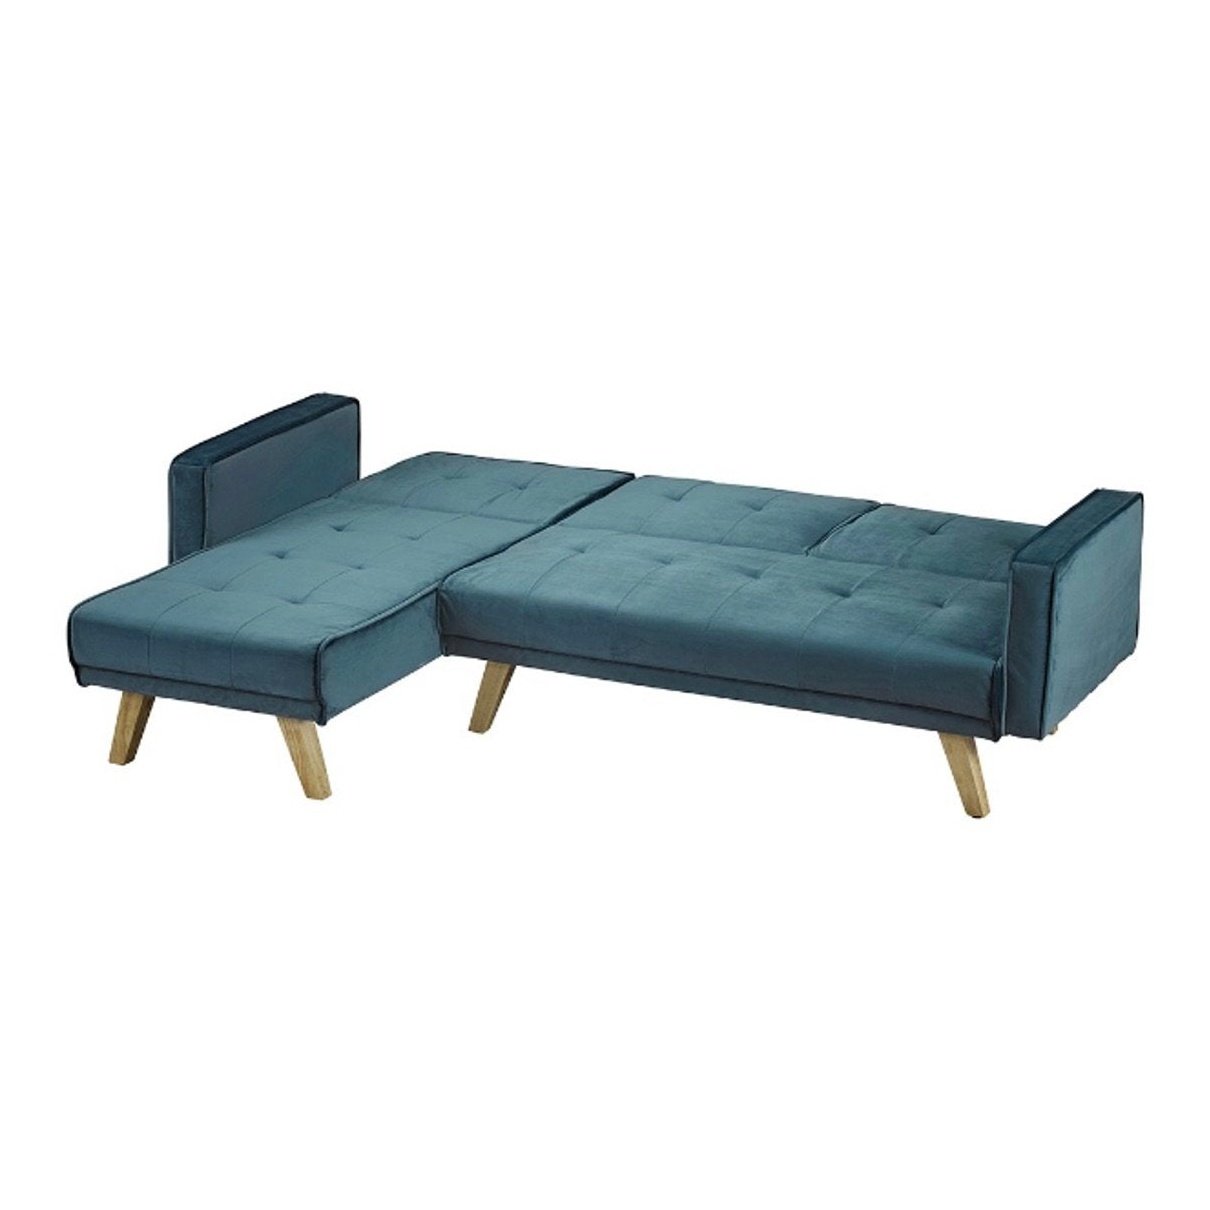 Tyson Sofa bed folded out - teal velvet | Manor Interiors